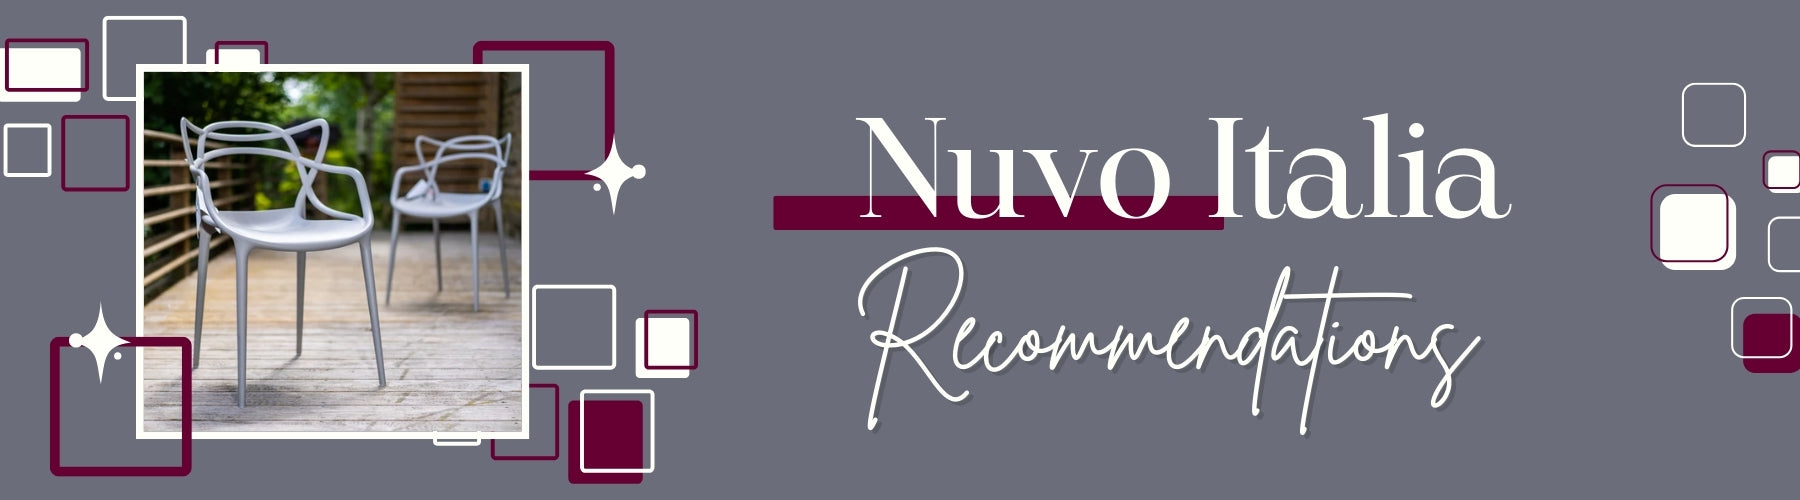 nuvo italia staff recommendations banner